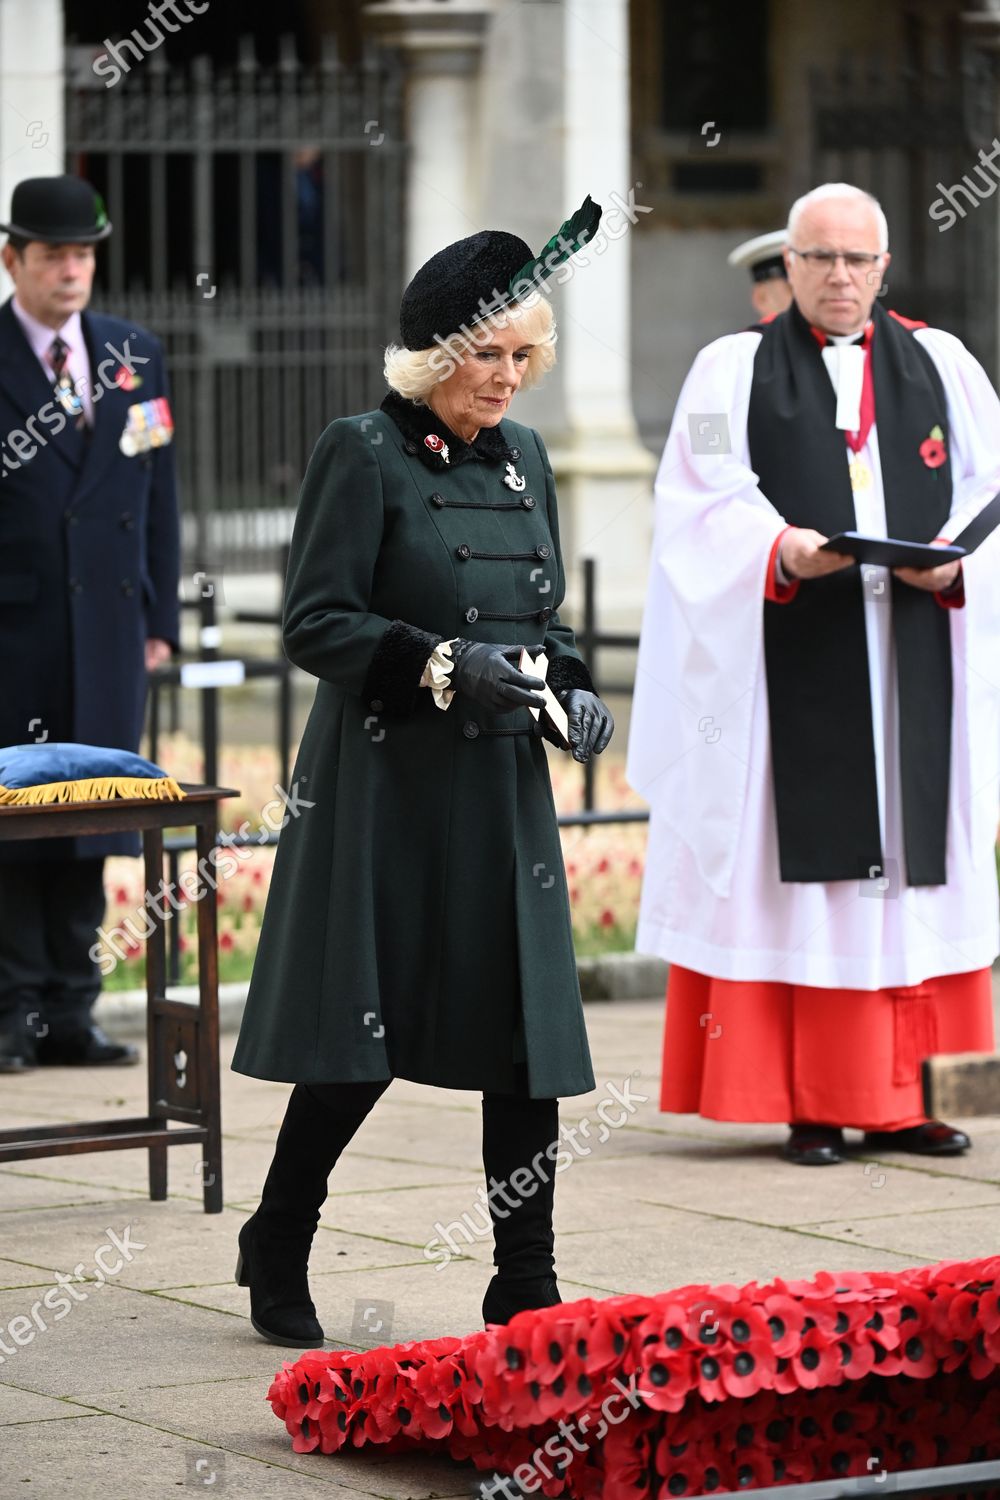 camilla-duchess-of-cornwall-attends-92nd-field-of-remembrance-at-westminster-abbey-london-uk-shutterstock-editorial-10995712q.jpg